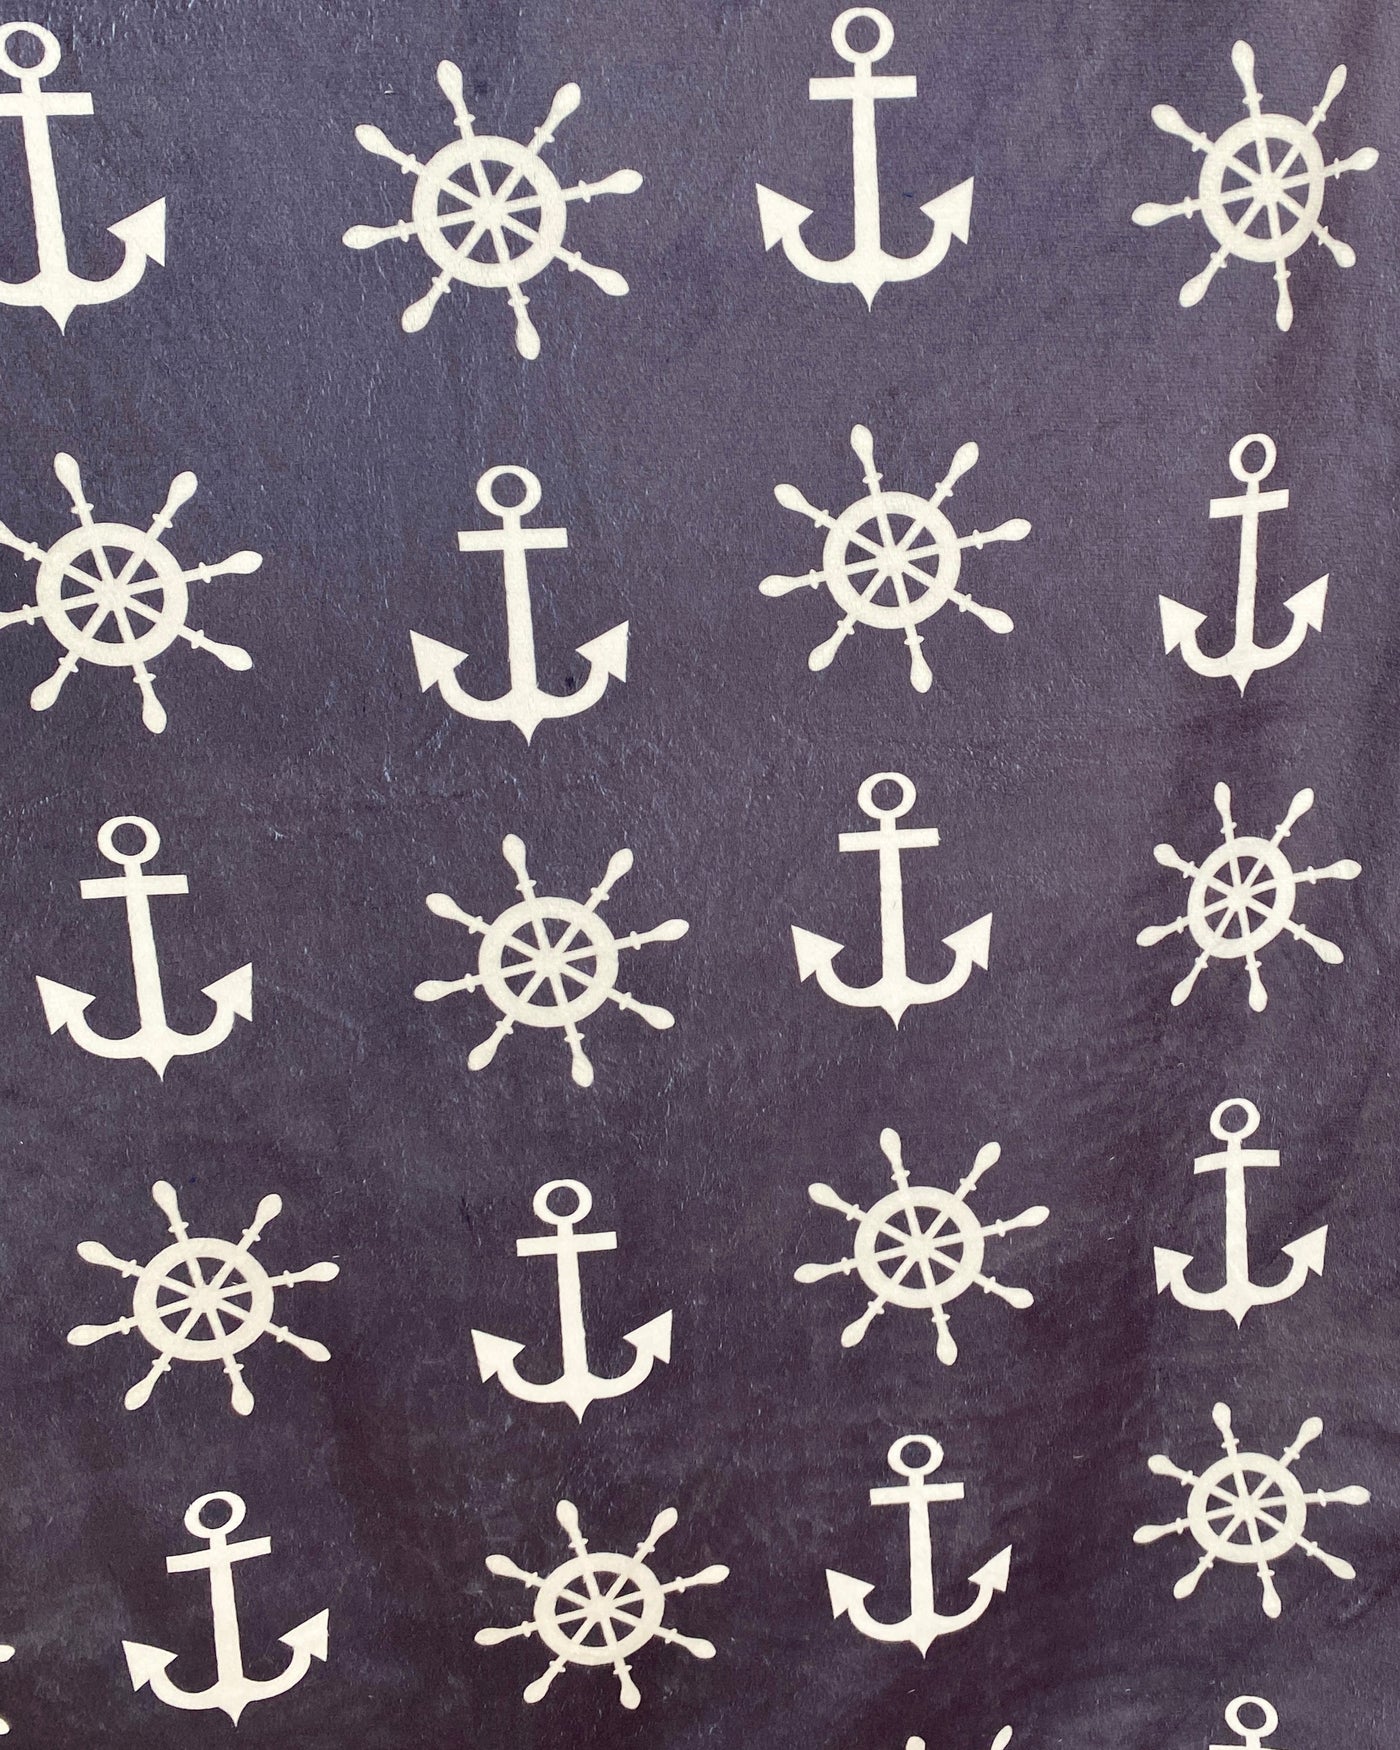 Hooded Baby Towel (0-18 months): Boat Anchors